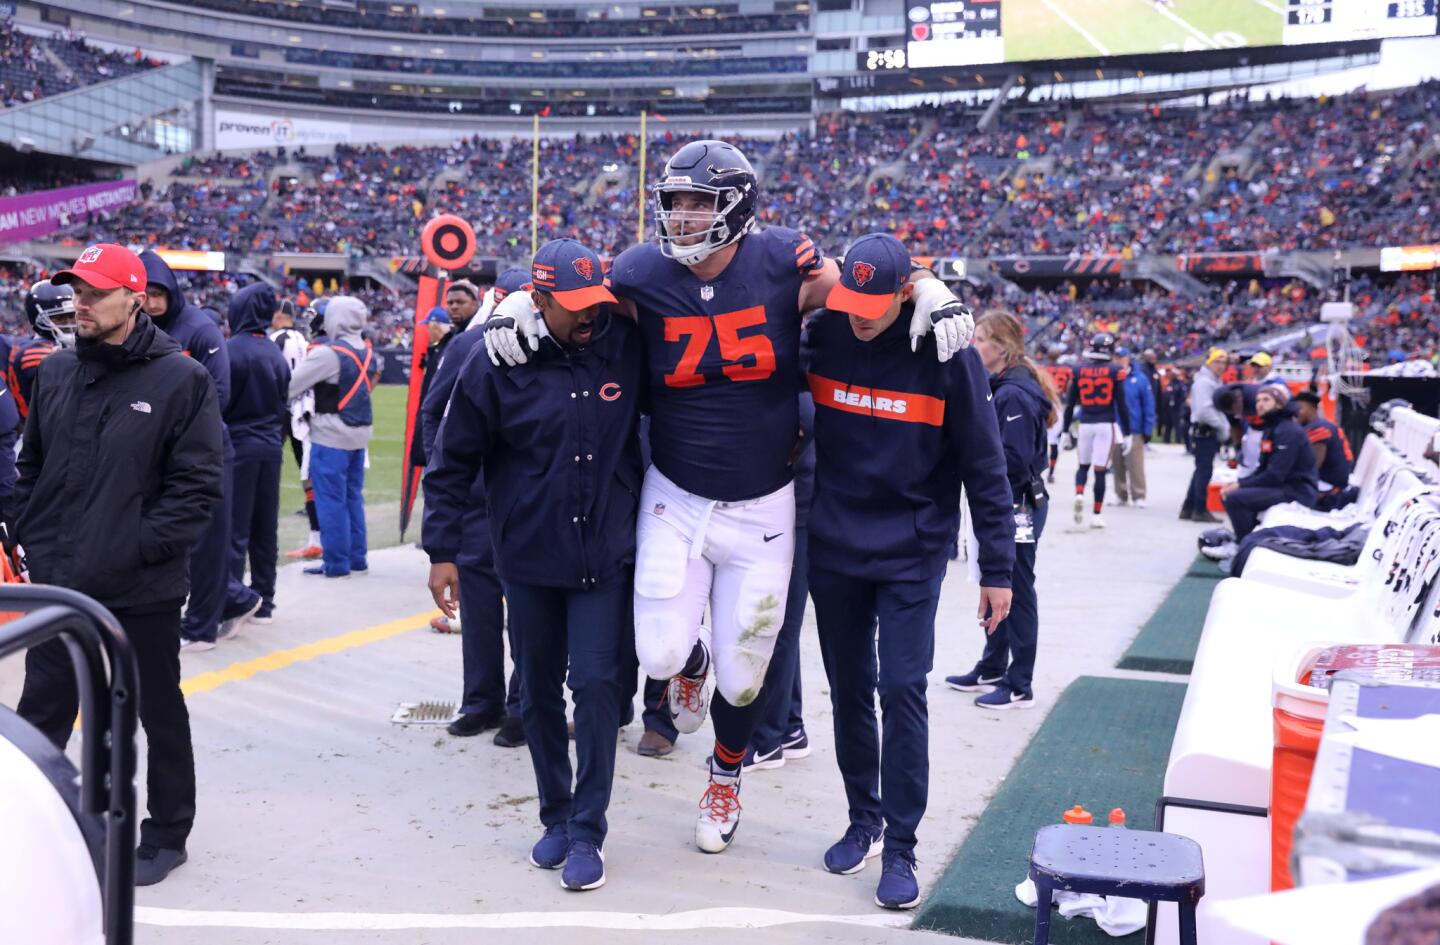 Bears offensive guard Kyle Long is helped off the field after suffering an injury in the fourth quarter of against the Jets at Soldier Field on Sunday, Oct. 28, 2018.